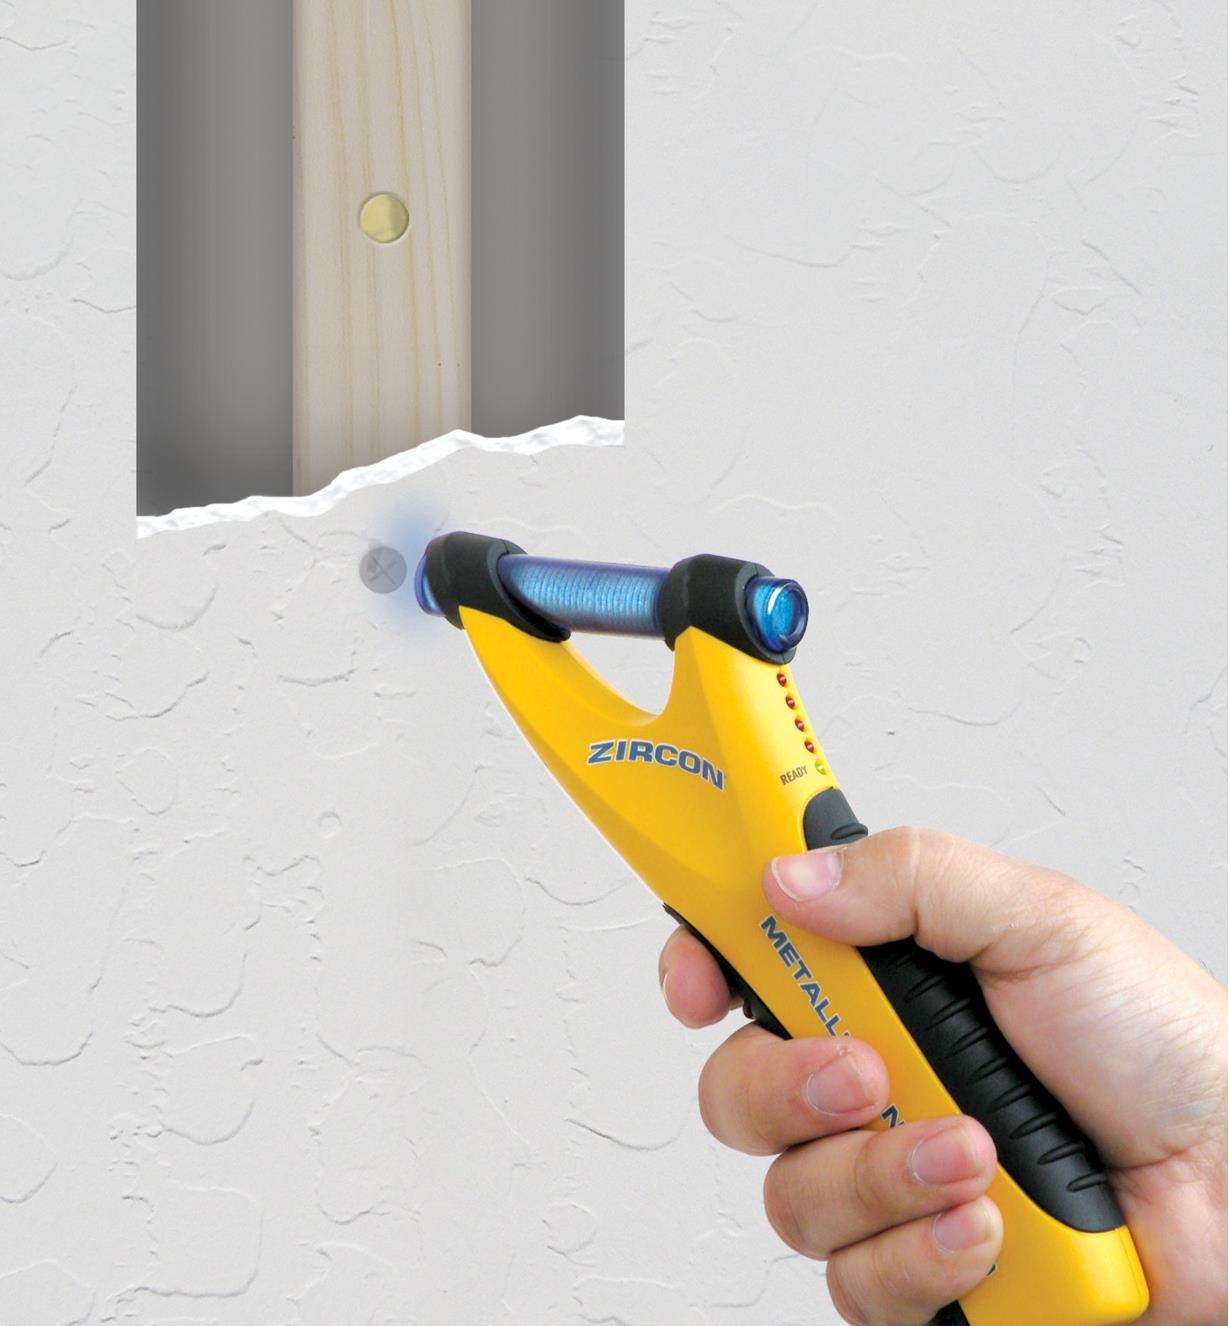 Finding a stud behind drywall by pinpointing nails with the Zircon M40 metal detector